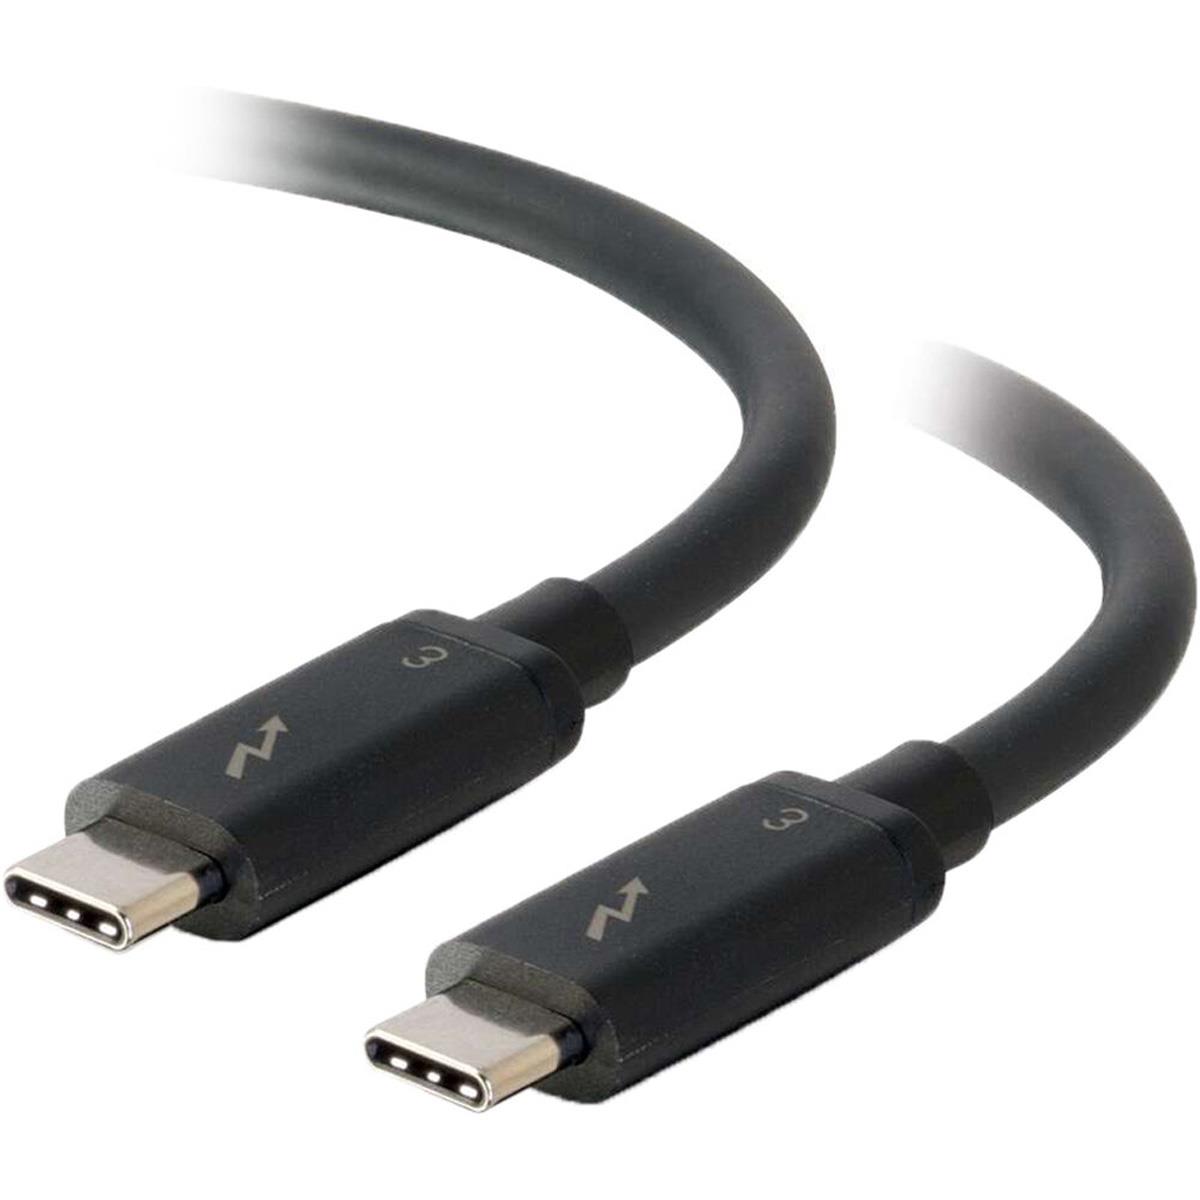 Image of C2G 6' Thunderbolt 3 USB-C Male to USB-C Male Cable